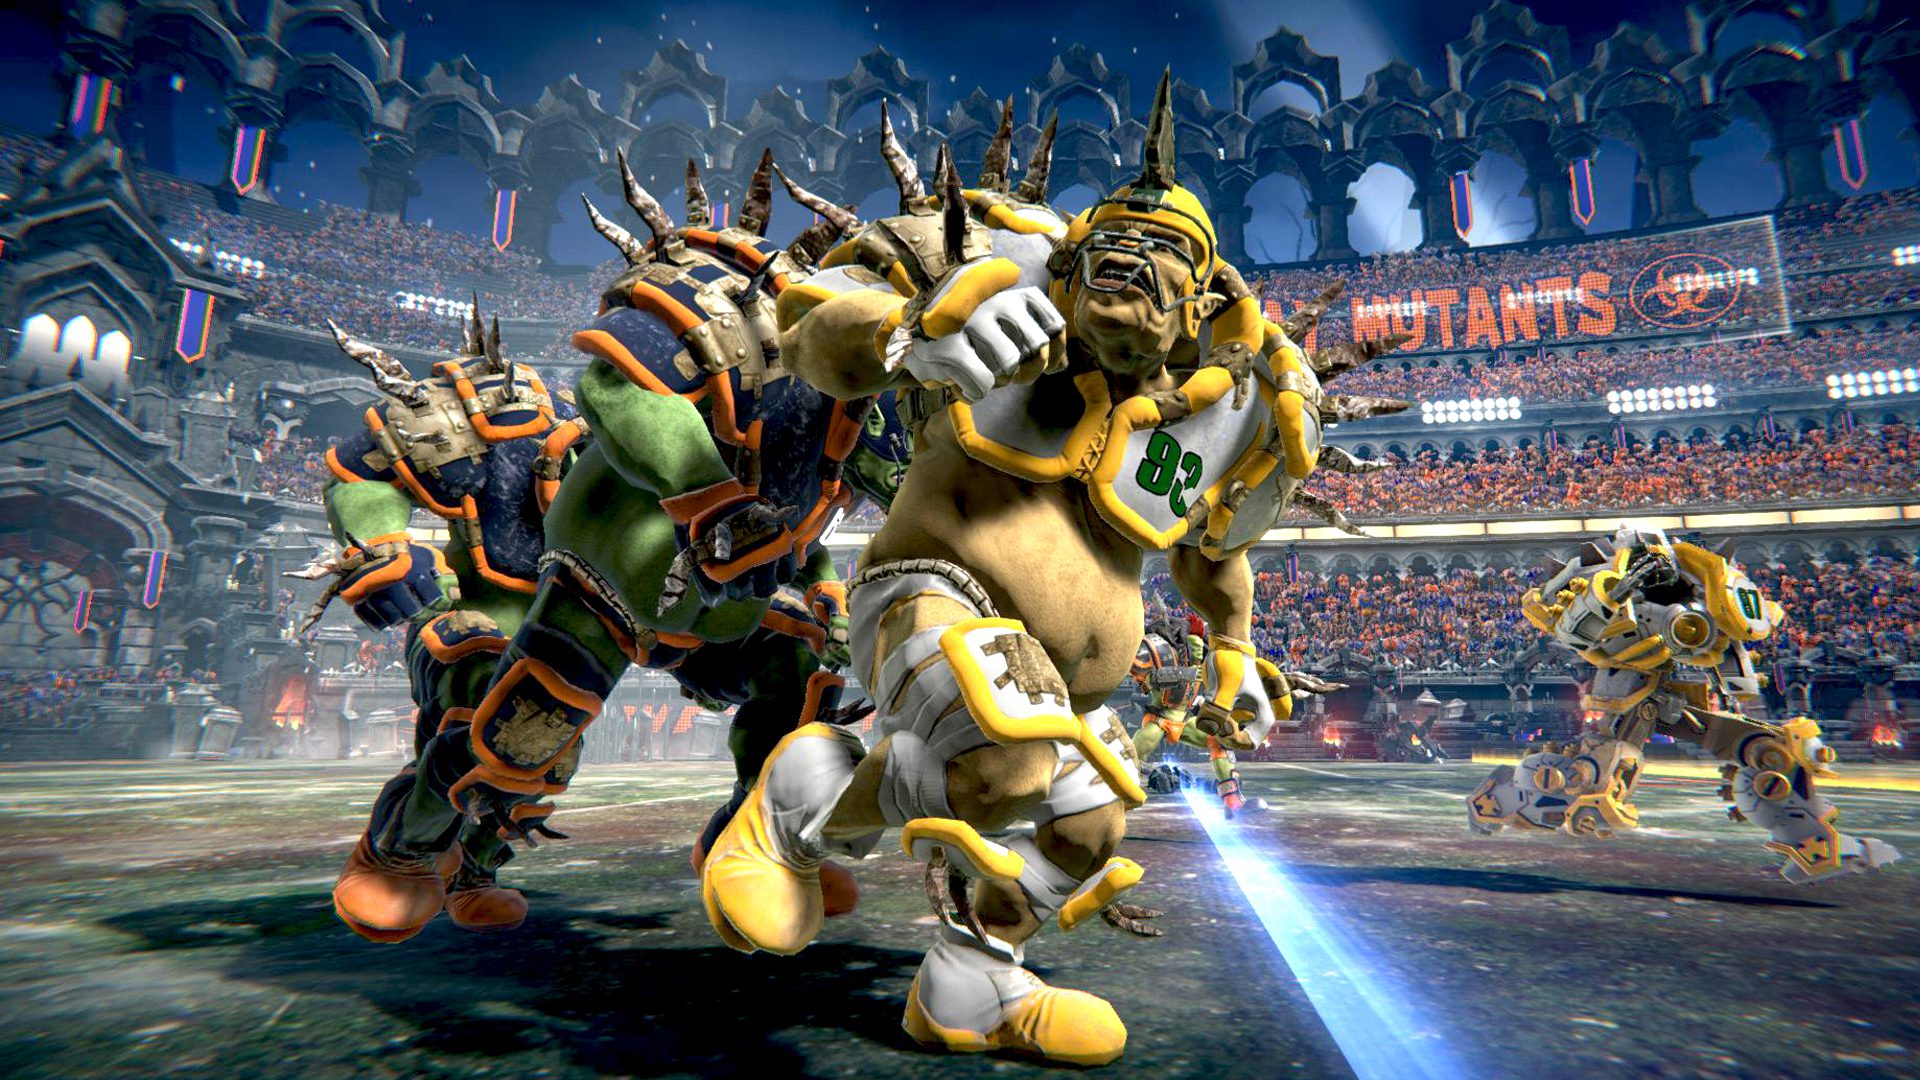 Mutant Football League: Dynasty Edition drops just in time for Halloween